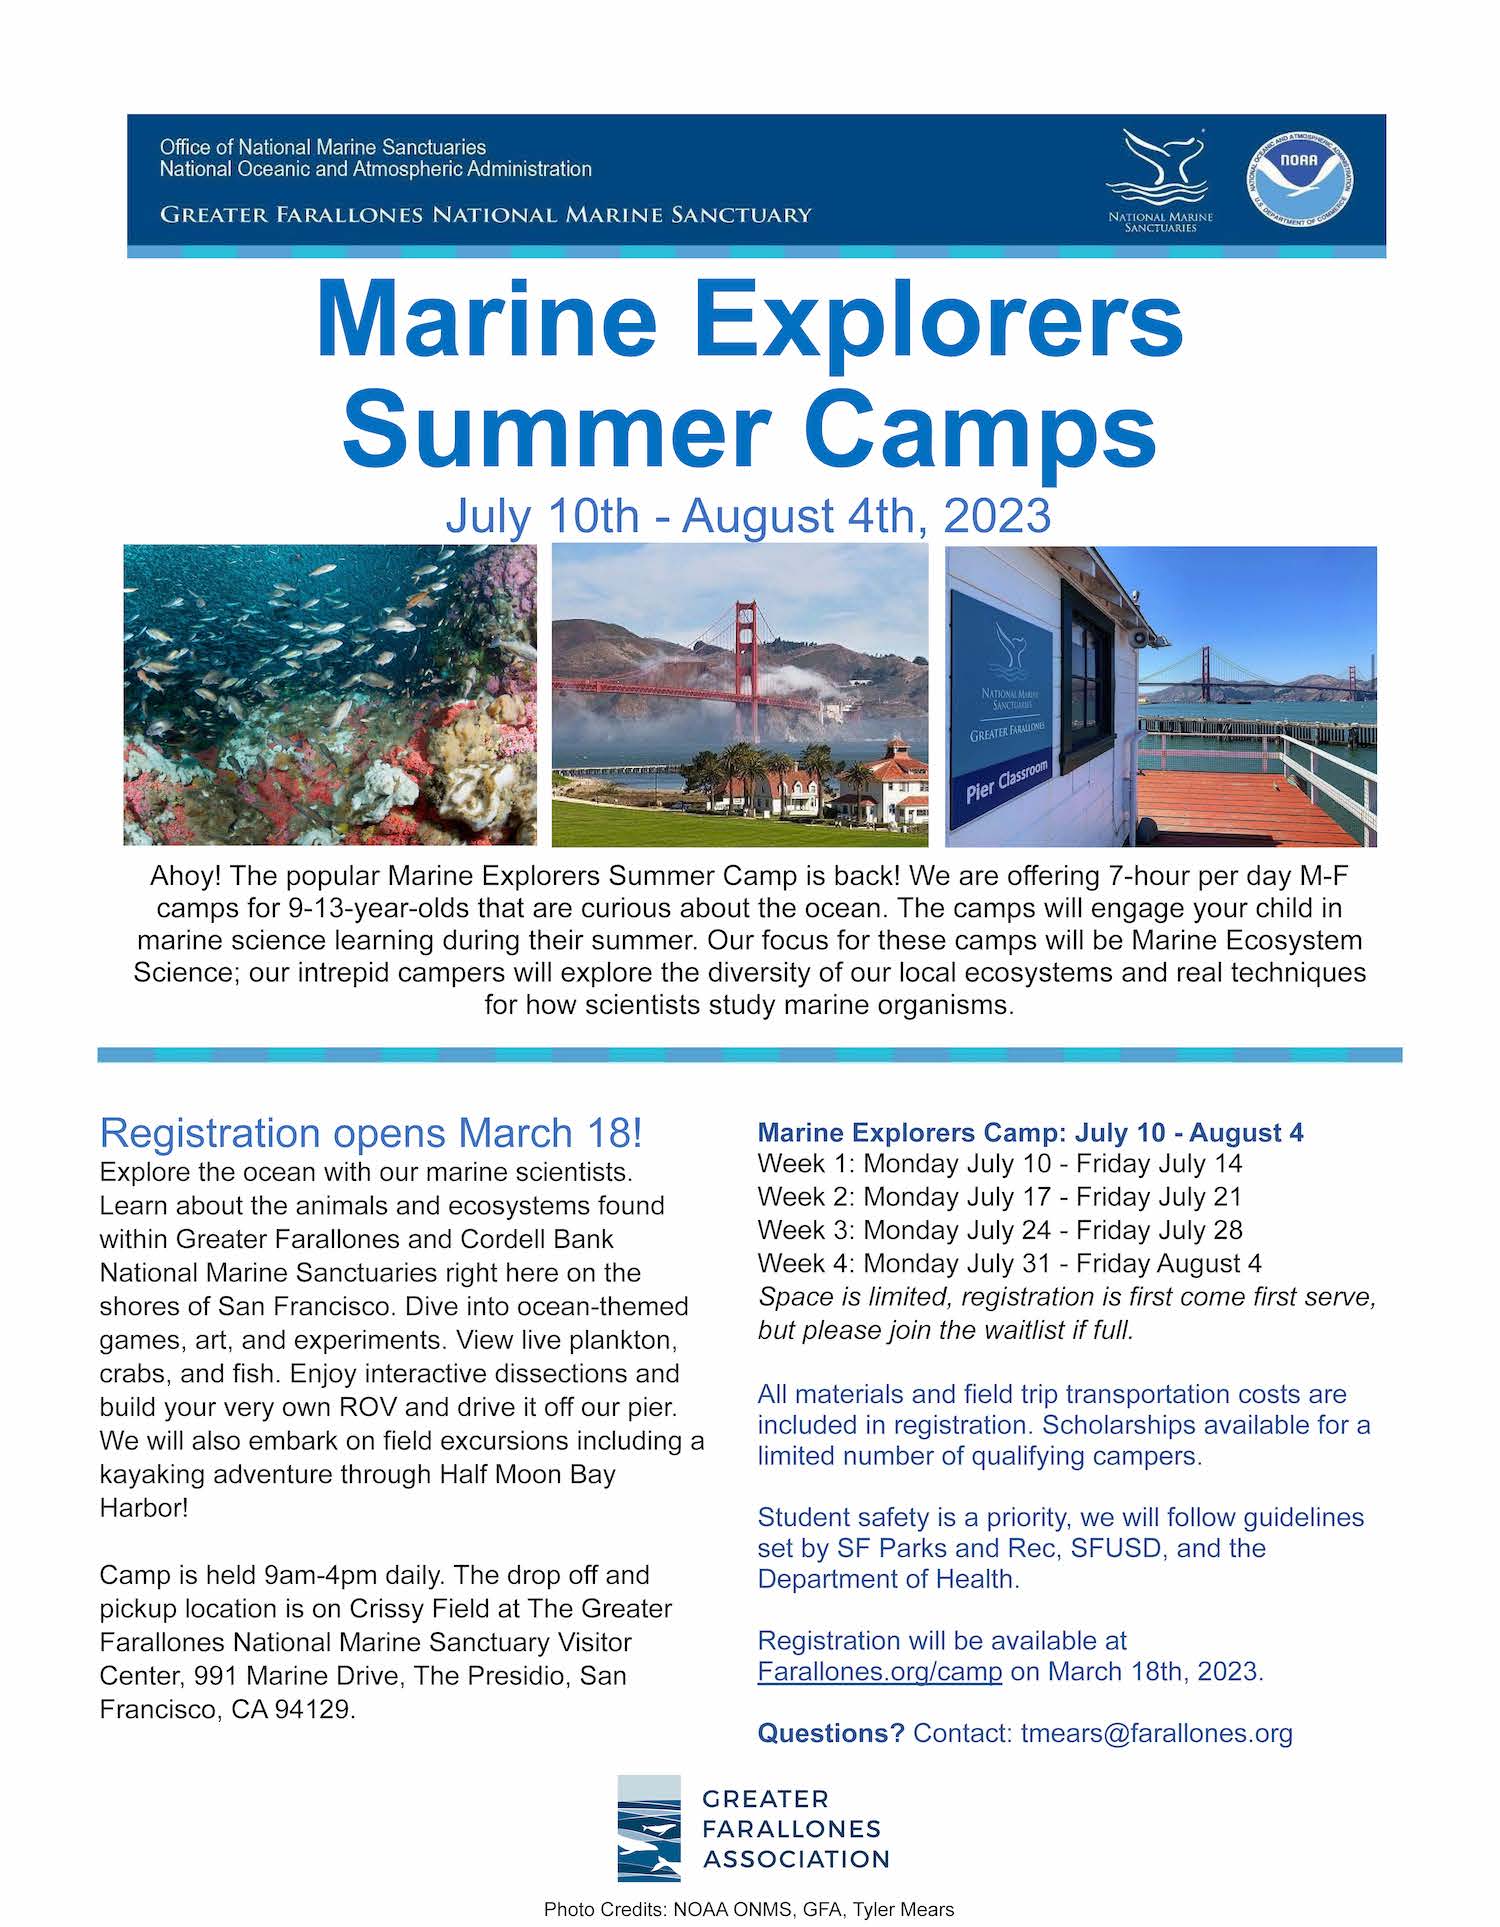 Flier content: Marine Explorers Summer Camps July 10th - August 4th, 2023. Explore the ocean with our marine scientists. Learn about the animals and ecosystems found within Greater Farallones and Cordell Bank National Marine Sanctuaries right here on the shores of San Francisco. Dive into ocean-themed games, art, and experiments. View live plankton, crabs, and fish. Enjoy interactive dissections and build your very own ROV and drive it off our pier. We will also embark on field excursions including a kayaking adventure through Half Moon Bay Harbor! Camp is held 9am-4pm daily. The drop off and pickup location is on Crissy Field at The Greater Farallones National Marine Sanctuary Visitor Center, 991 Marine Drive, The Presidio, San Francisco, CA 94129. Week 1: Monday July 10 - Friday July 14 Week 2: Monday July 17 - Friday July 21 Week 3: Monday July 24 - Friday July 28 Week 4: Monday July 31 - Friday August 4 All materials and field trip transportation costs are included in registration. Scholarships available for a limited number of qualifying campers. Student safety is a priority, we will follow guidelines set by SF Parks and Rec, SFUSD, and the Department of Health. Registration will be available at Farallones.org/campon March 18th, 2023. Questions?Contact: tmears@farallones.org